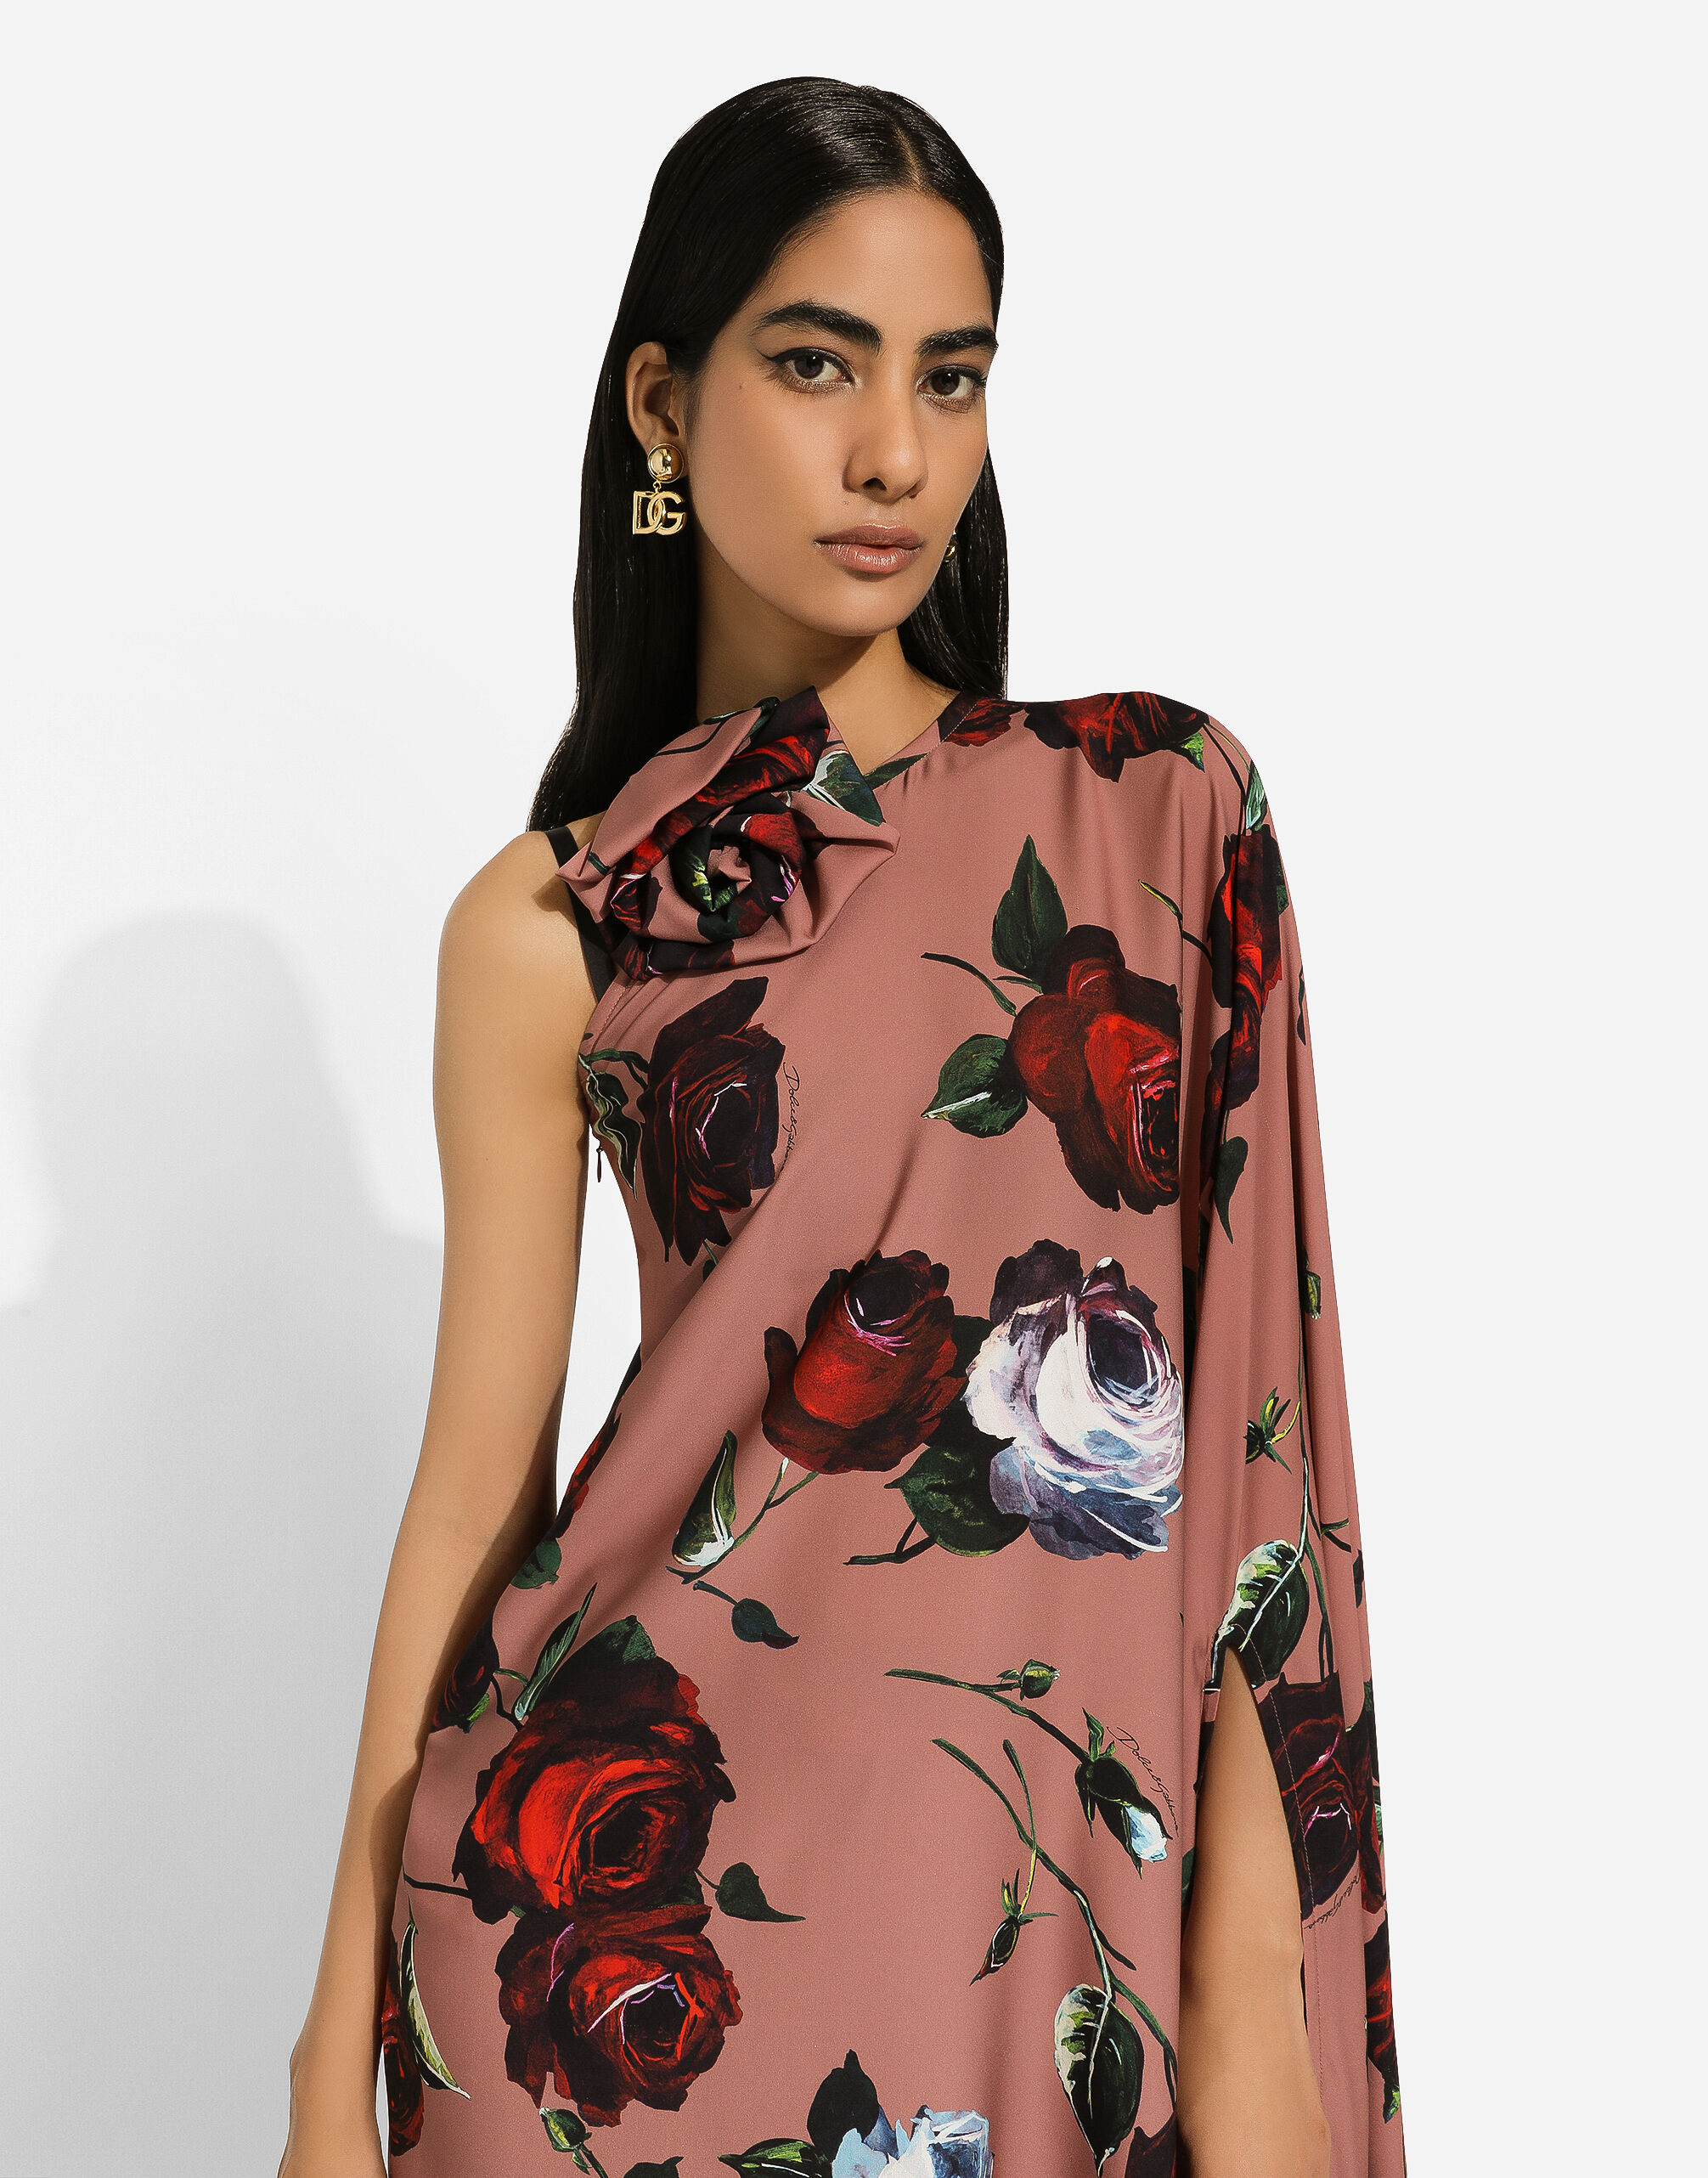 Her lip to asymmetrical floral dress - ロングワンピース